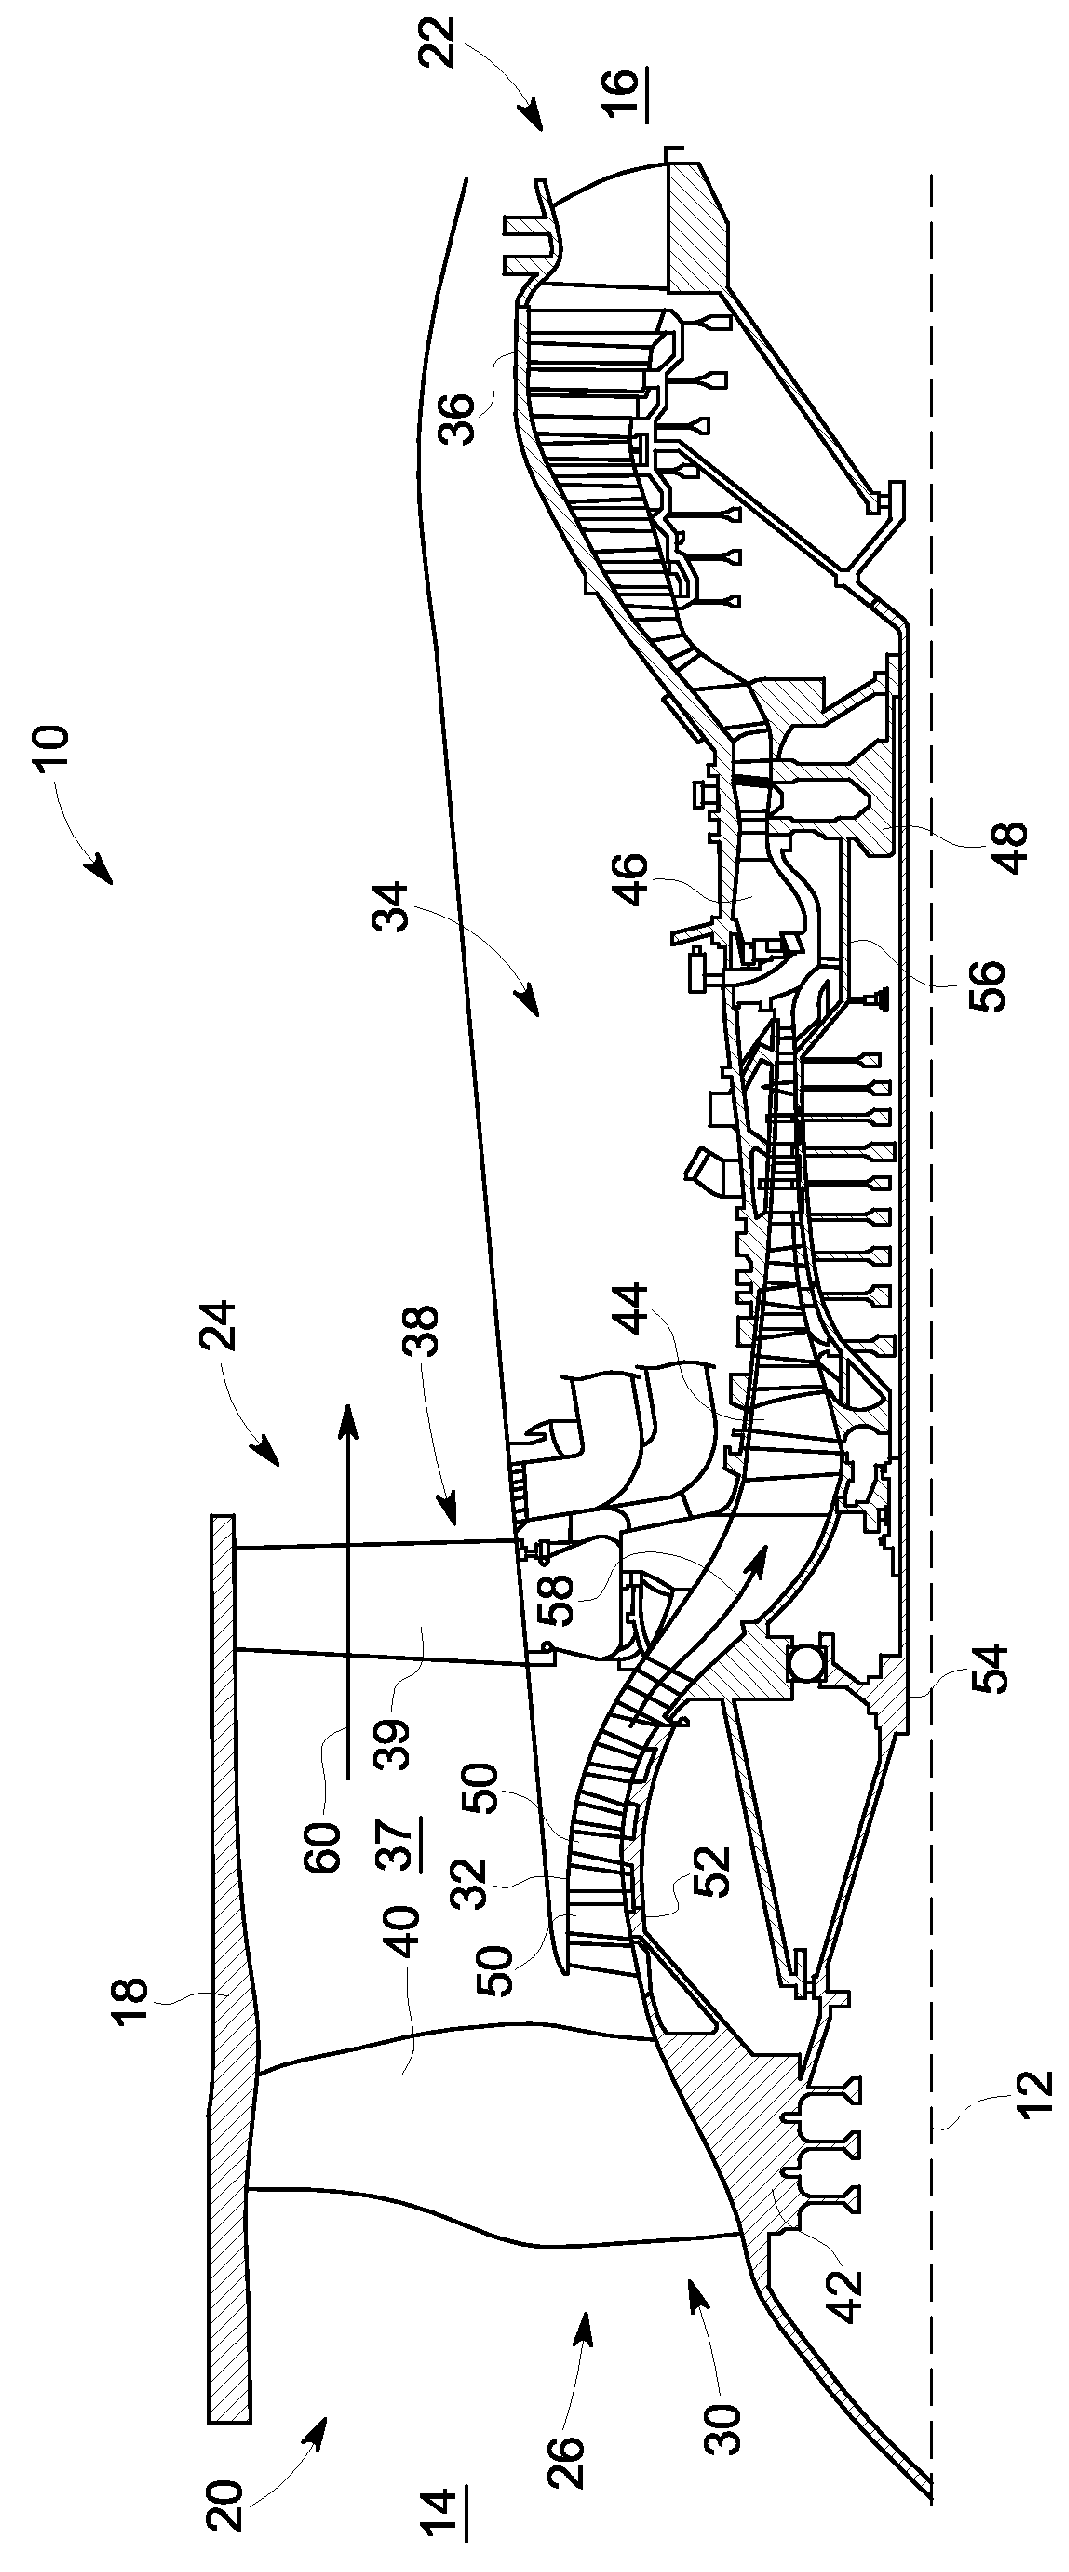 Airfoils for wake desensitization and method for fabricating same